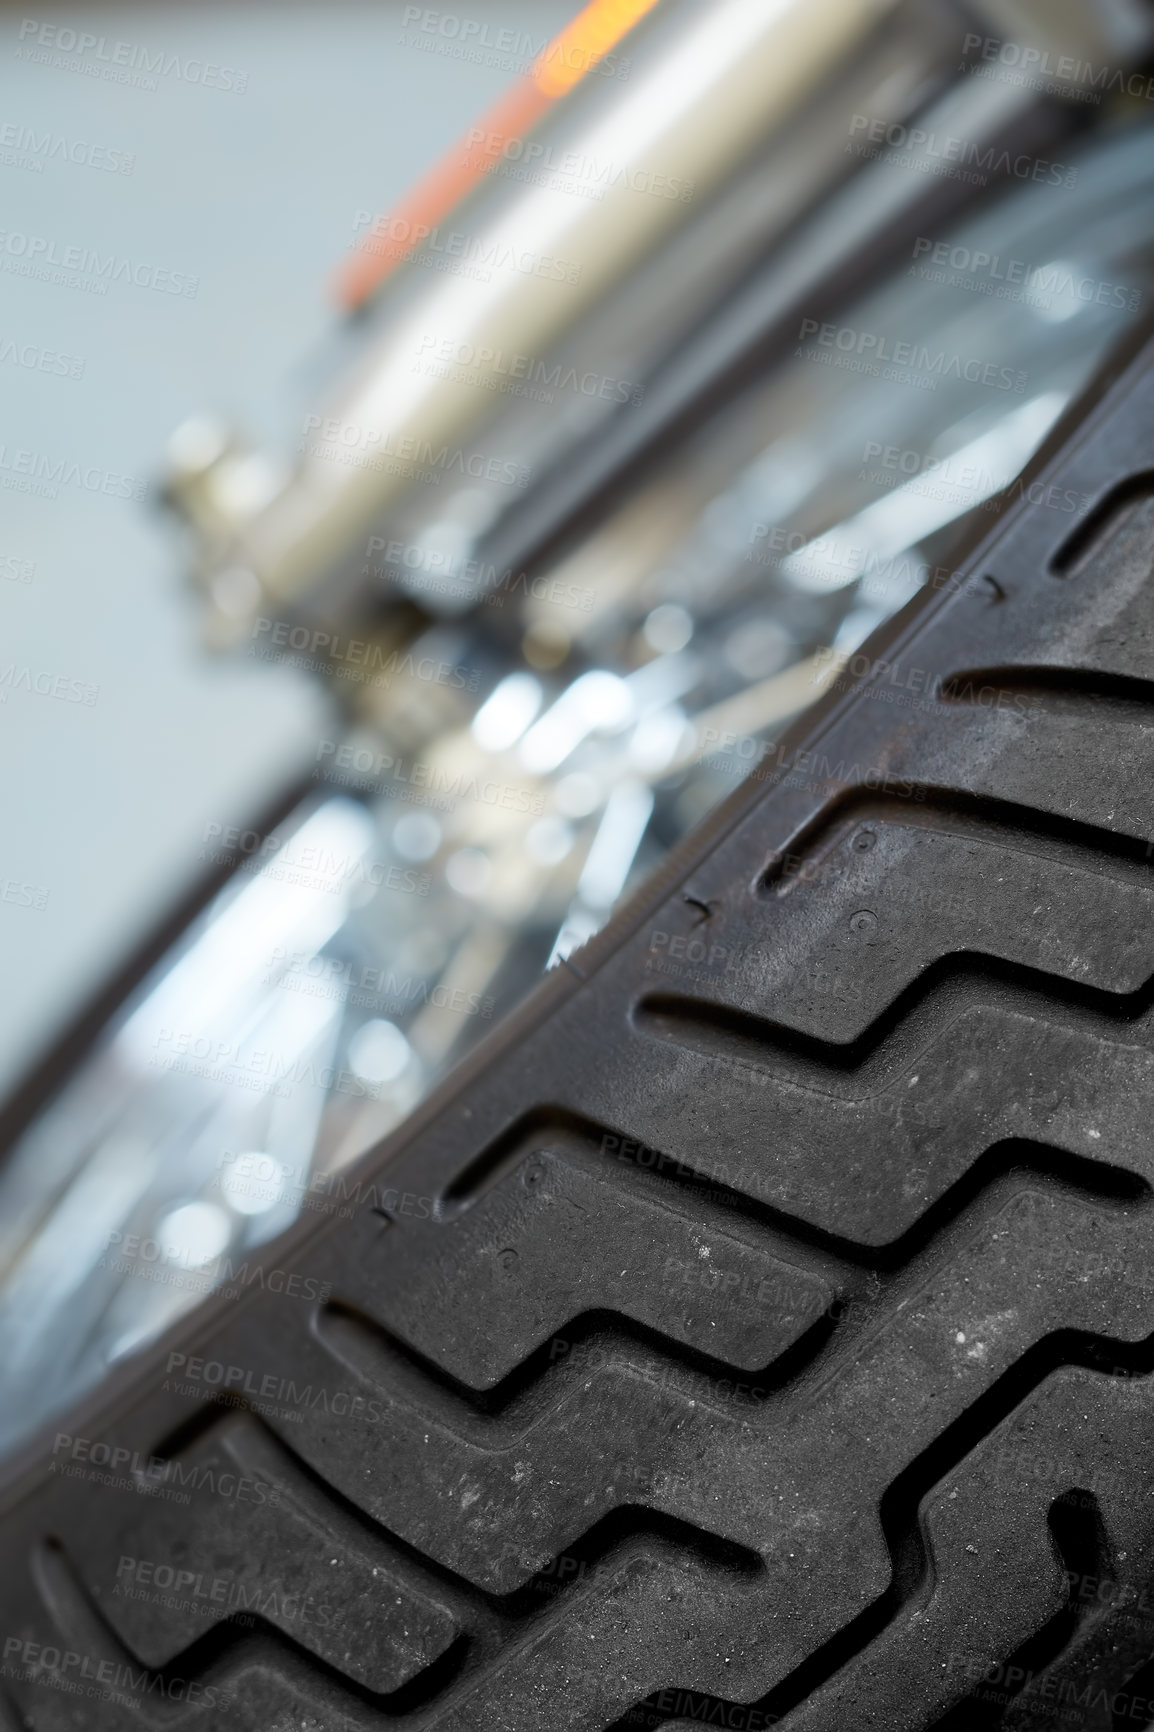 Buy stock photo Closeup tilted view of a motorbike tire. Tires designed for custom modern sports bike. Suspension on classic motorcycle front wheel. Maintenance on vintage shock absorber and reflector on chrome body